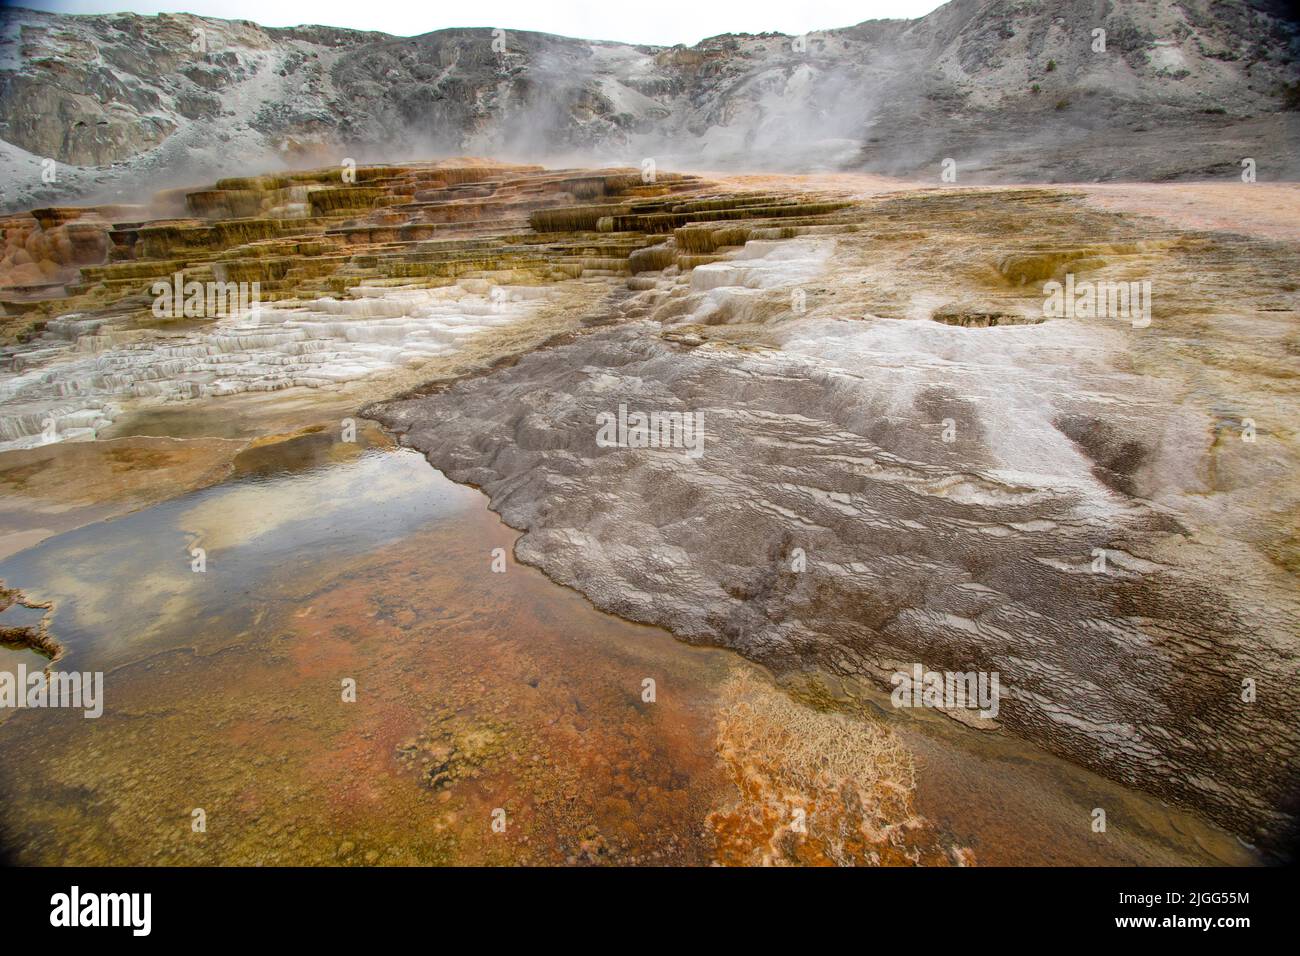 Colorful mineral deposits form the Main Terrace at Mammoth Hot Springs in Yellowstone NP, WY, USA. Stock Photo